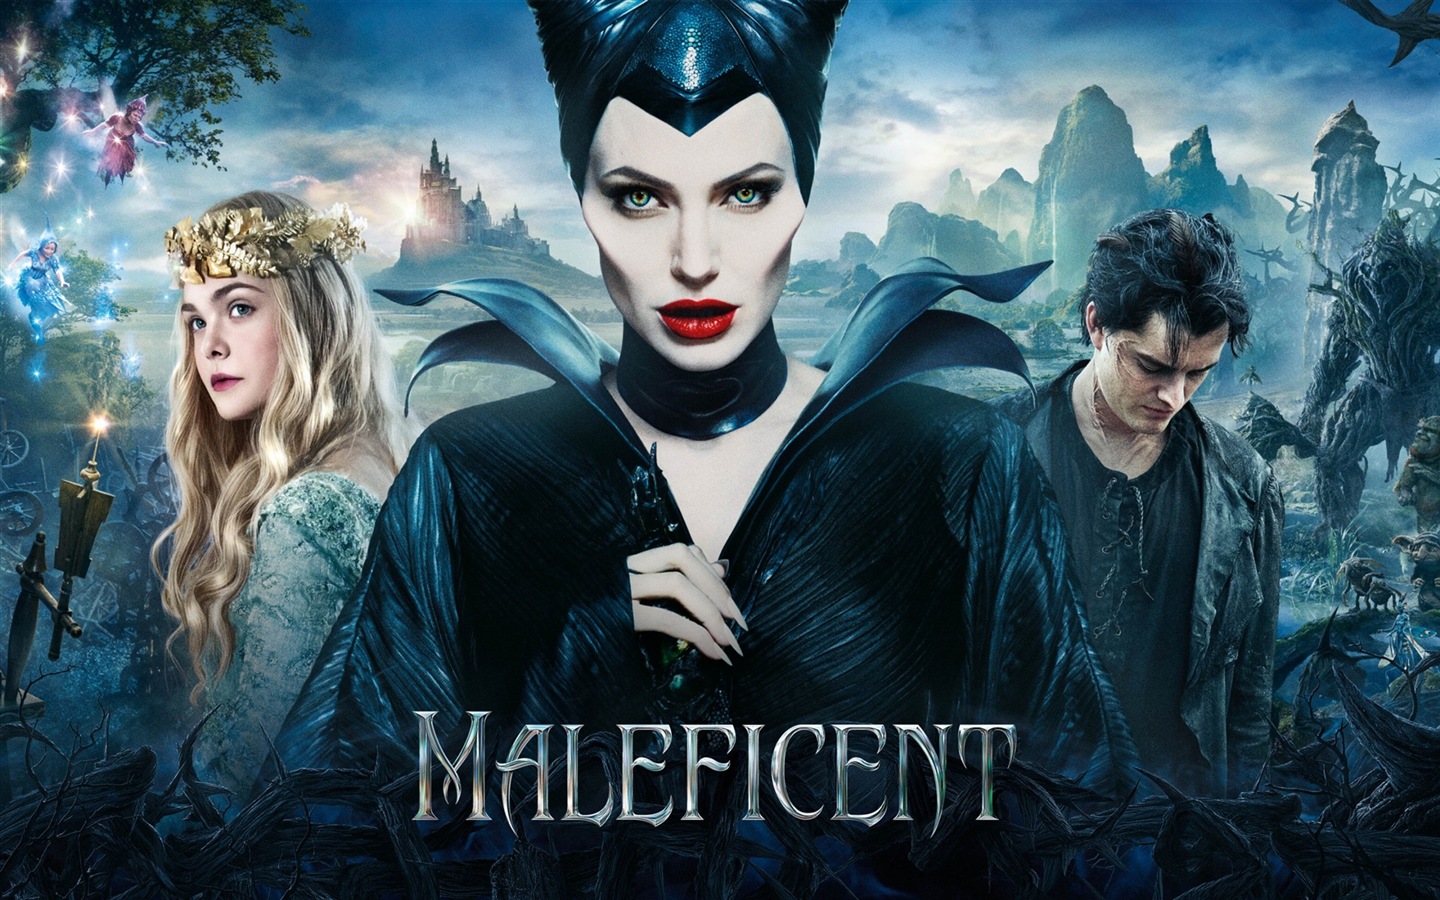 Maleficent 2014 HD movie wallpapers #1 - 1440x900